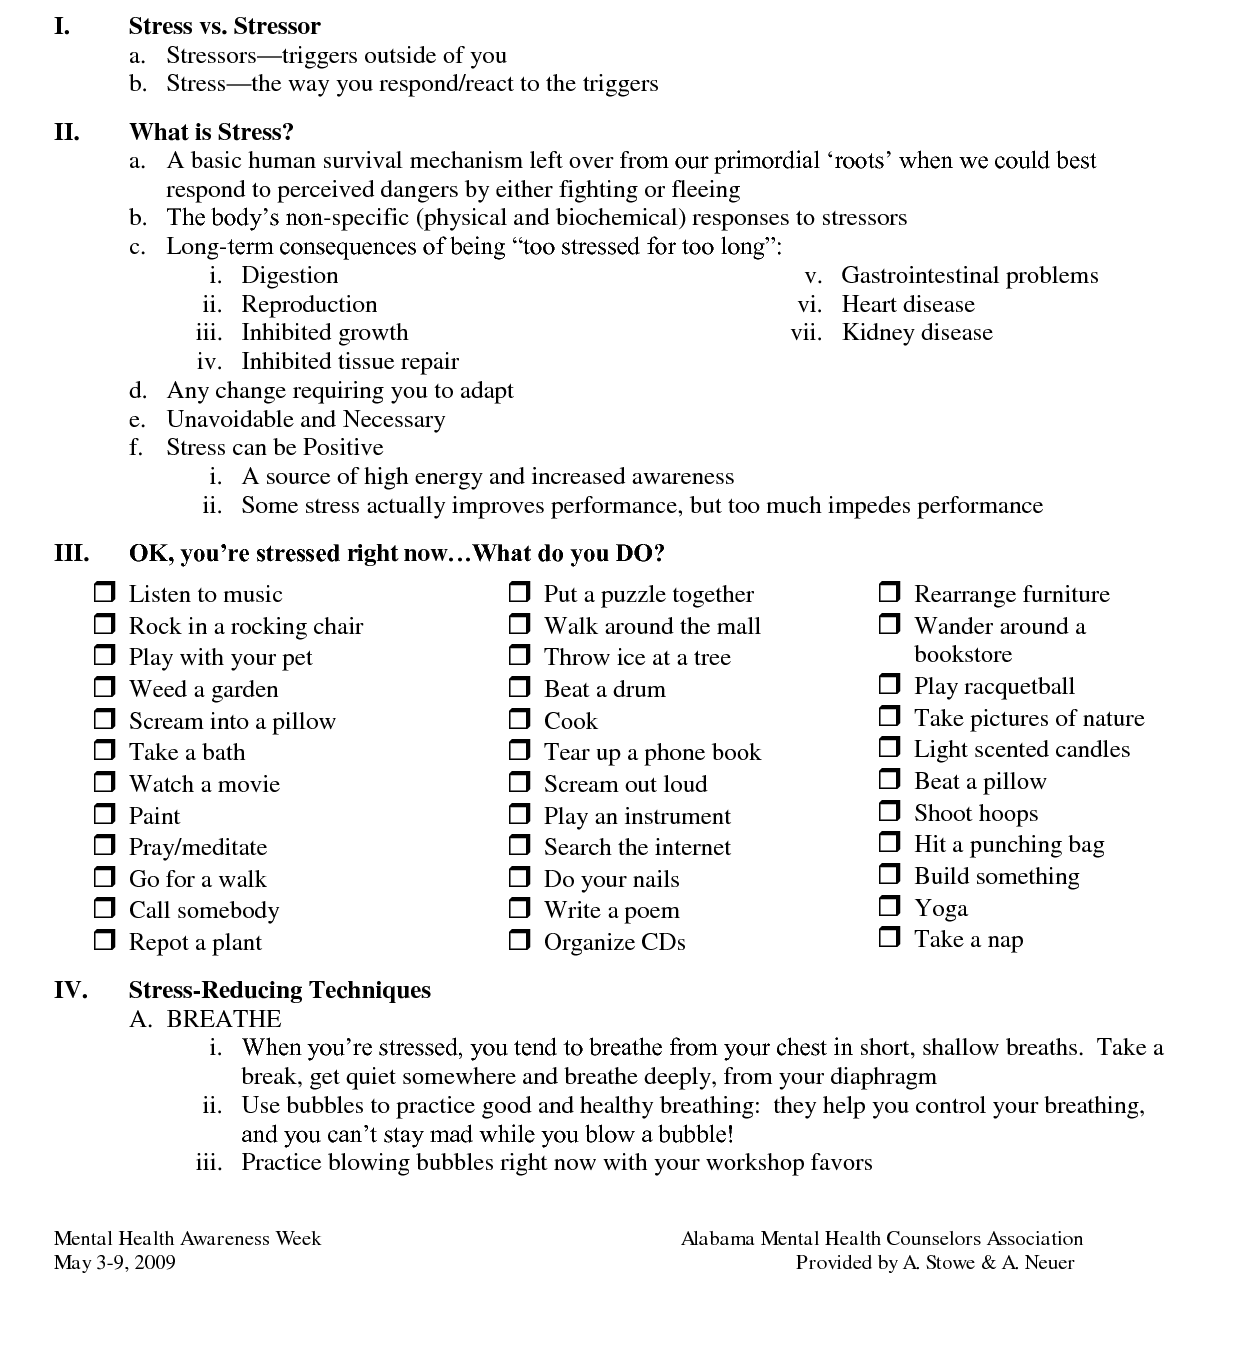 Stress Management Worksheet: Stress vs Stressor, What is Stress?, Ok you're stressed right now... what do you do? Stress Reducing Techniques